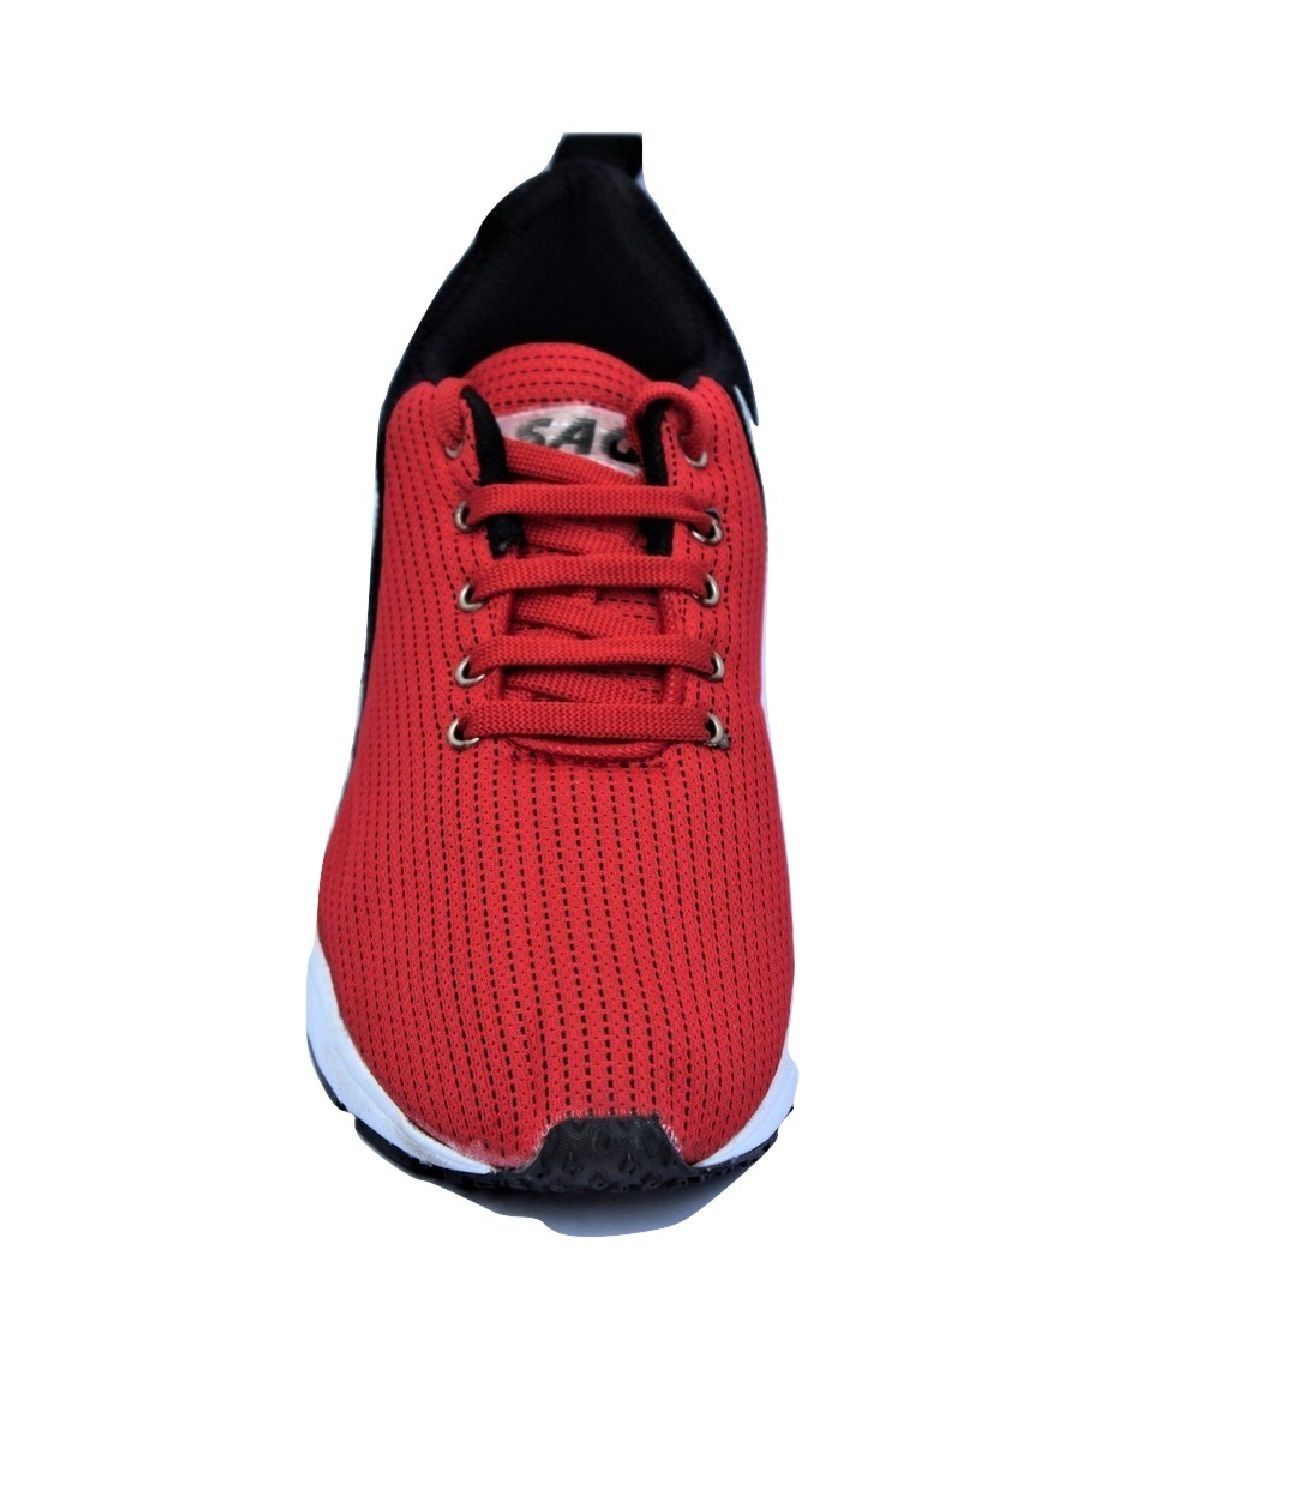 Rw Sega Red Black With Nike Sign Running Shoes Buy Online At Best Price On Snapdeal